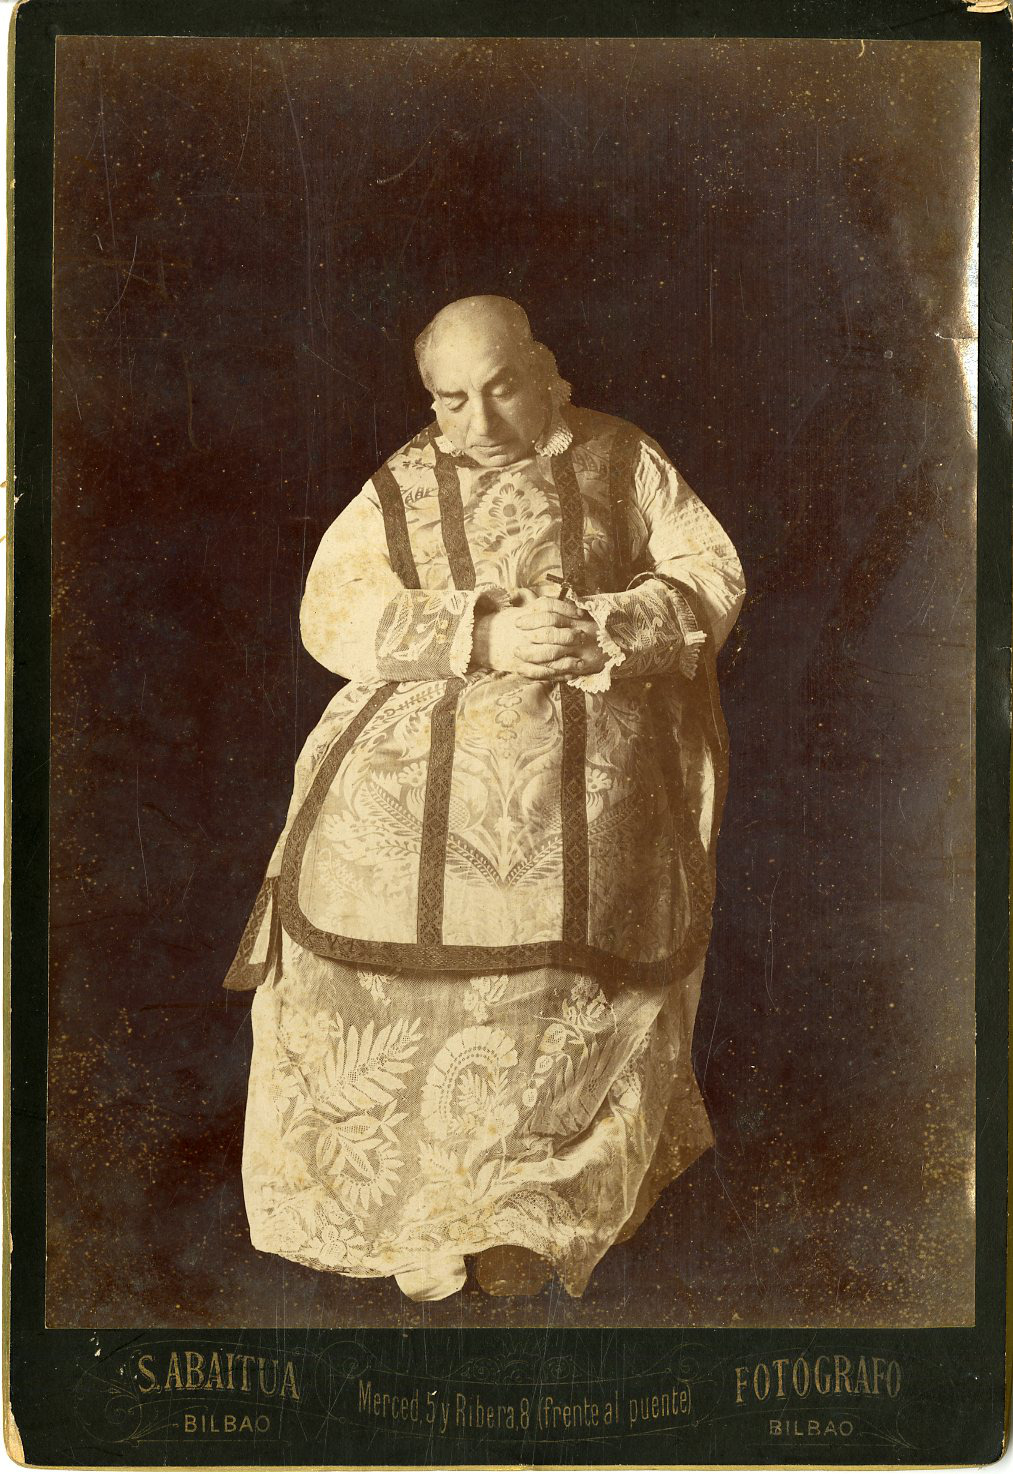 S. Abaitua, Bilbao, D. Mariano founder of Our Lady of Charity Bilbao  